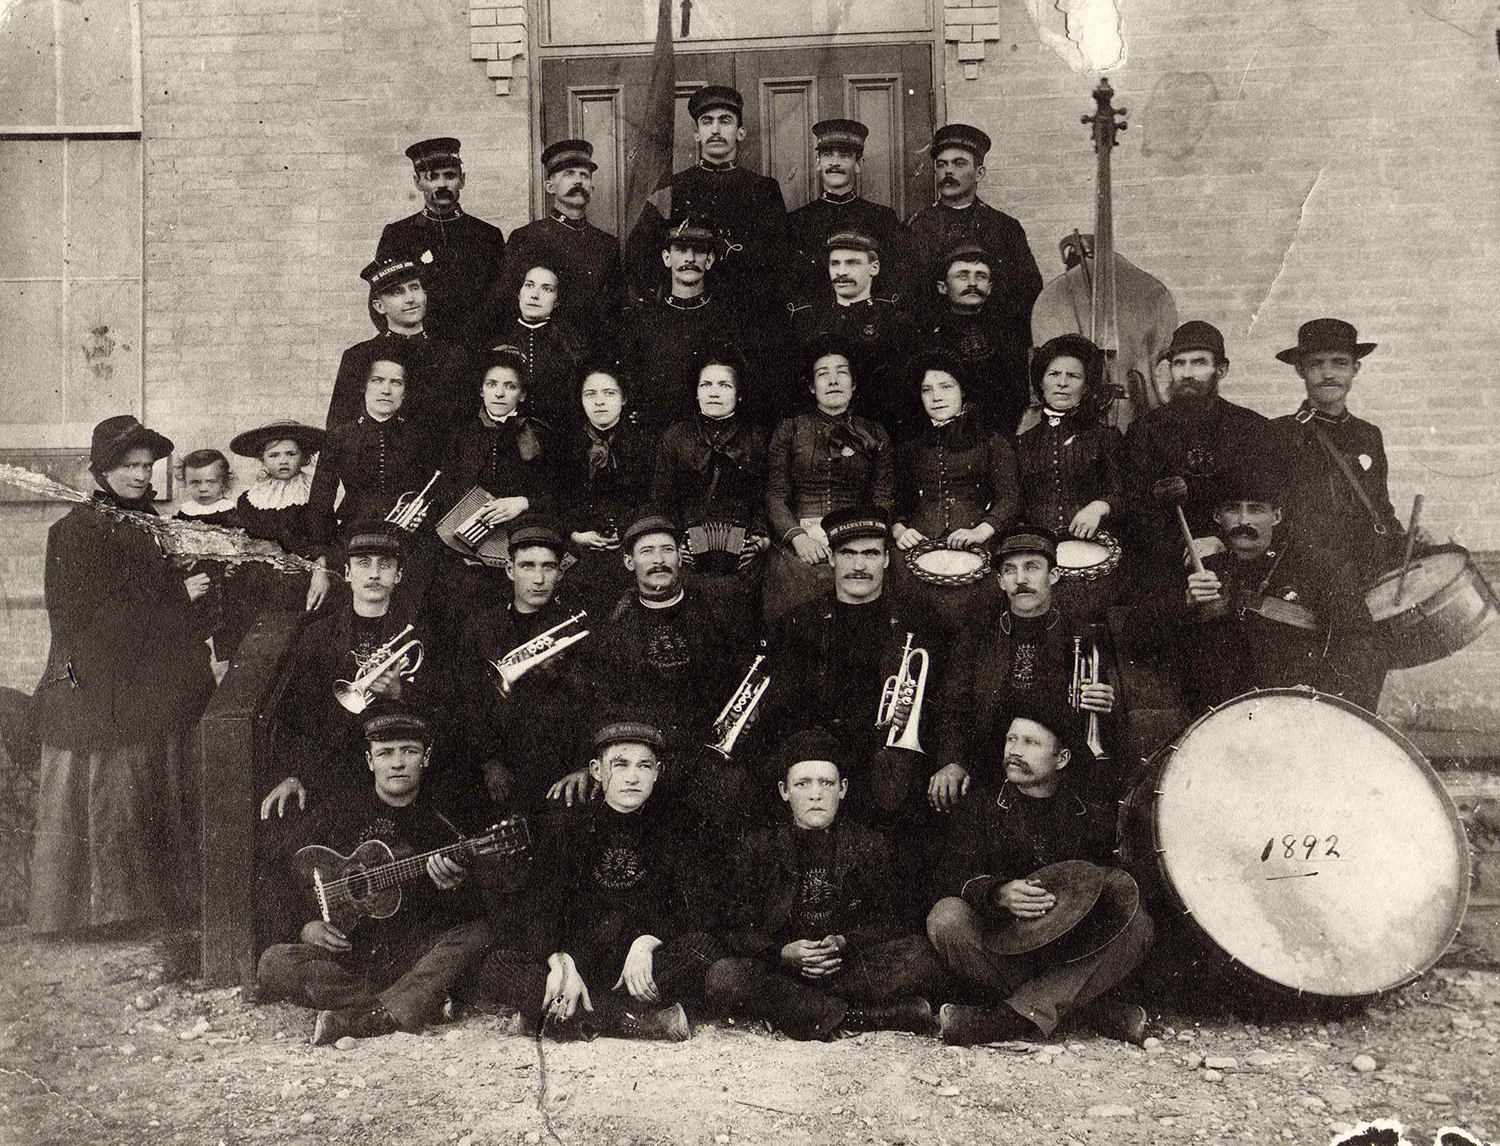 Glenmore Temple Band Celebrates 125 Years of Making Music